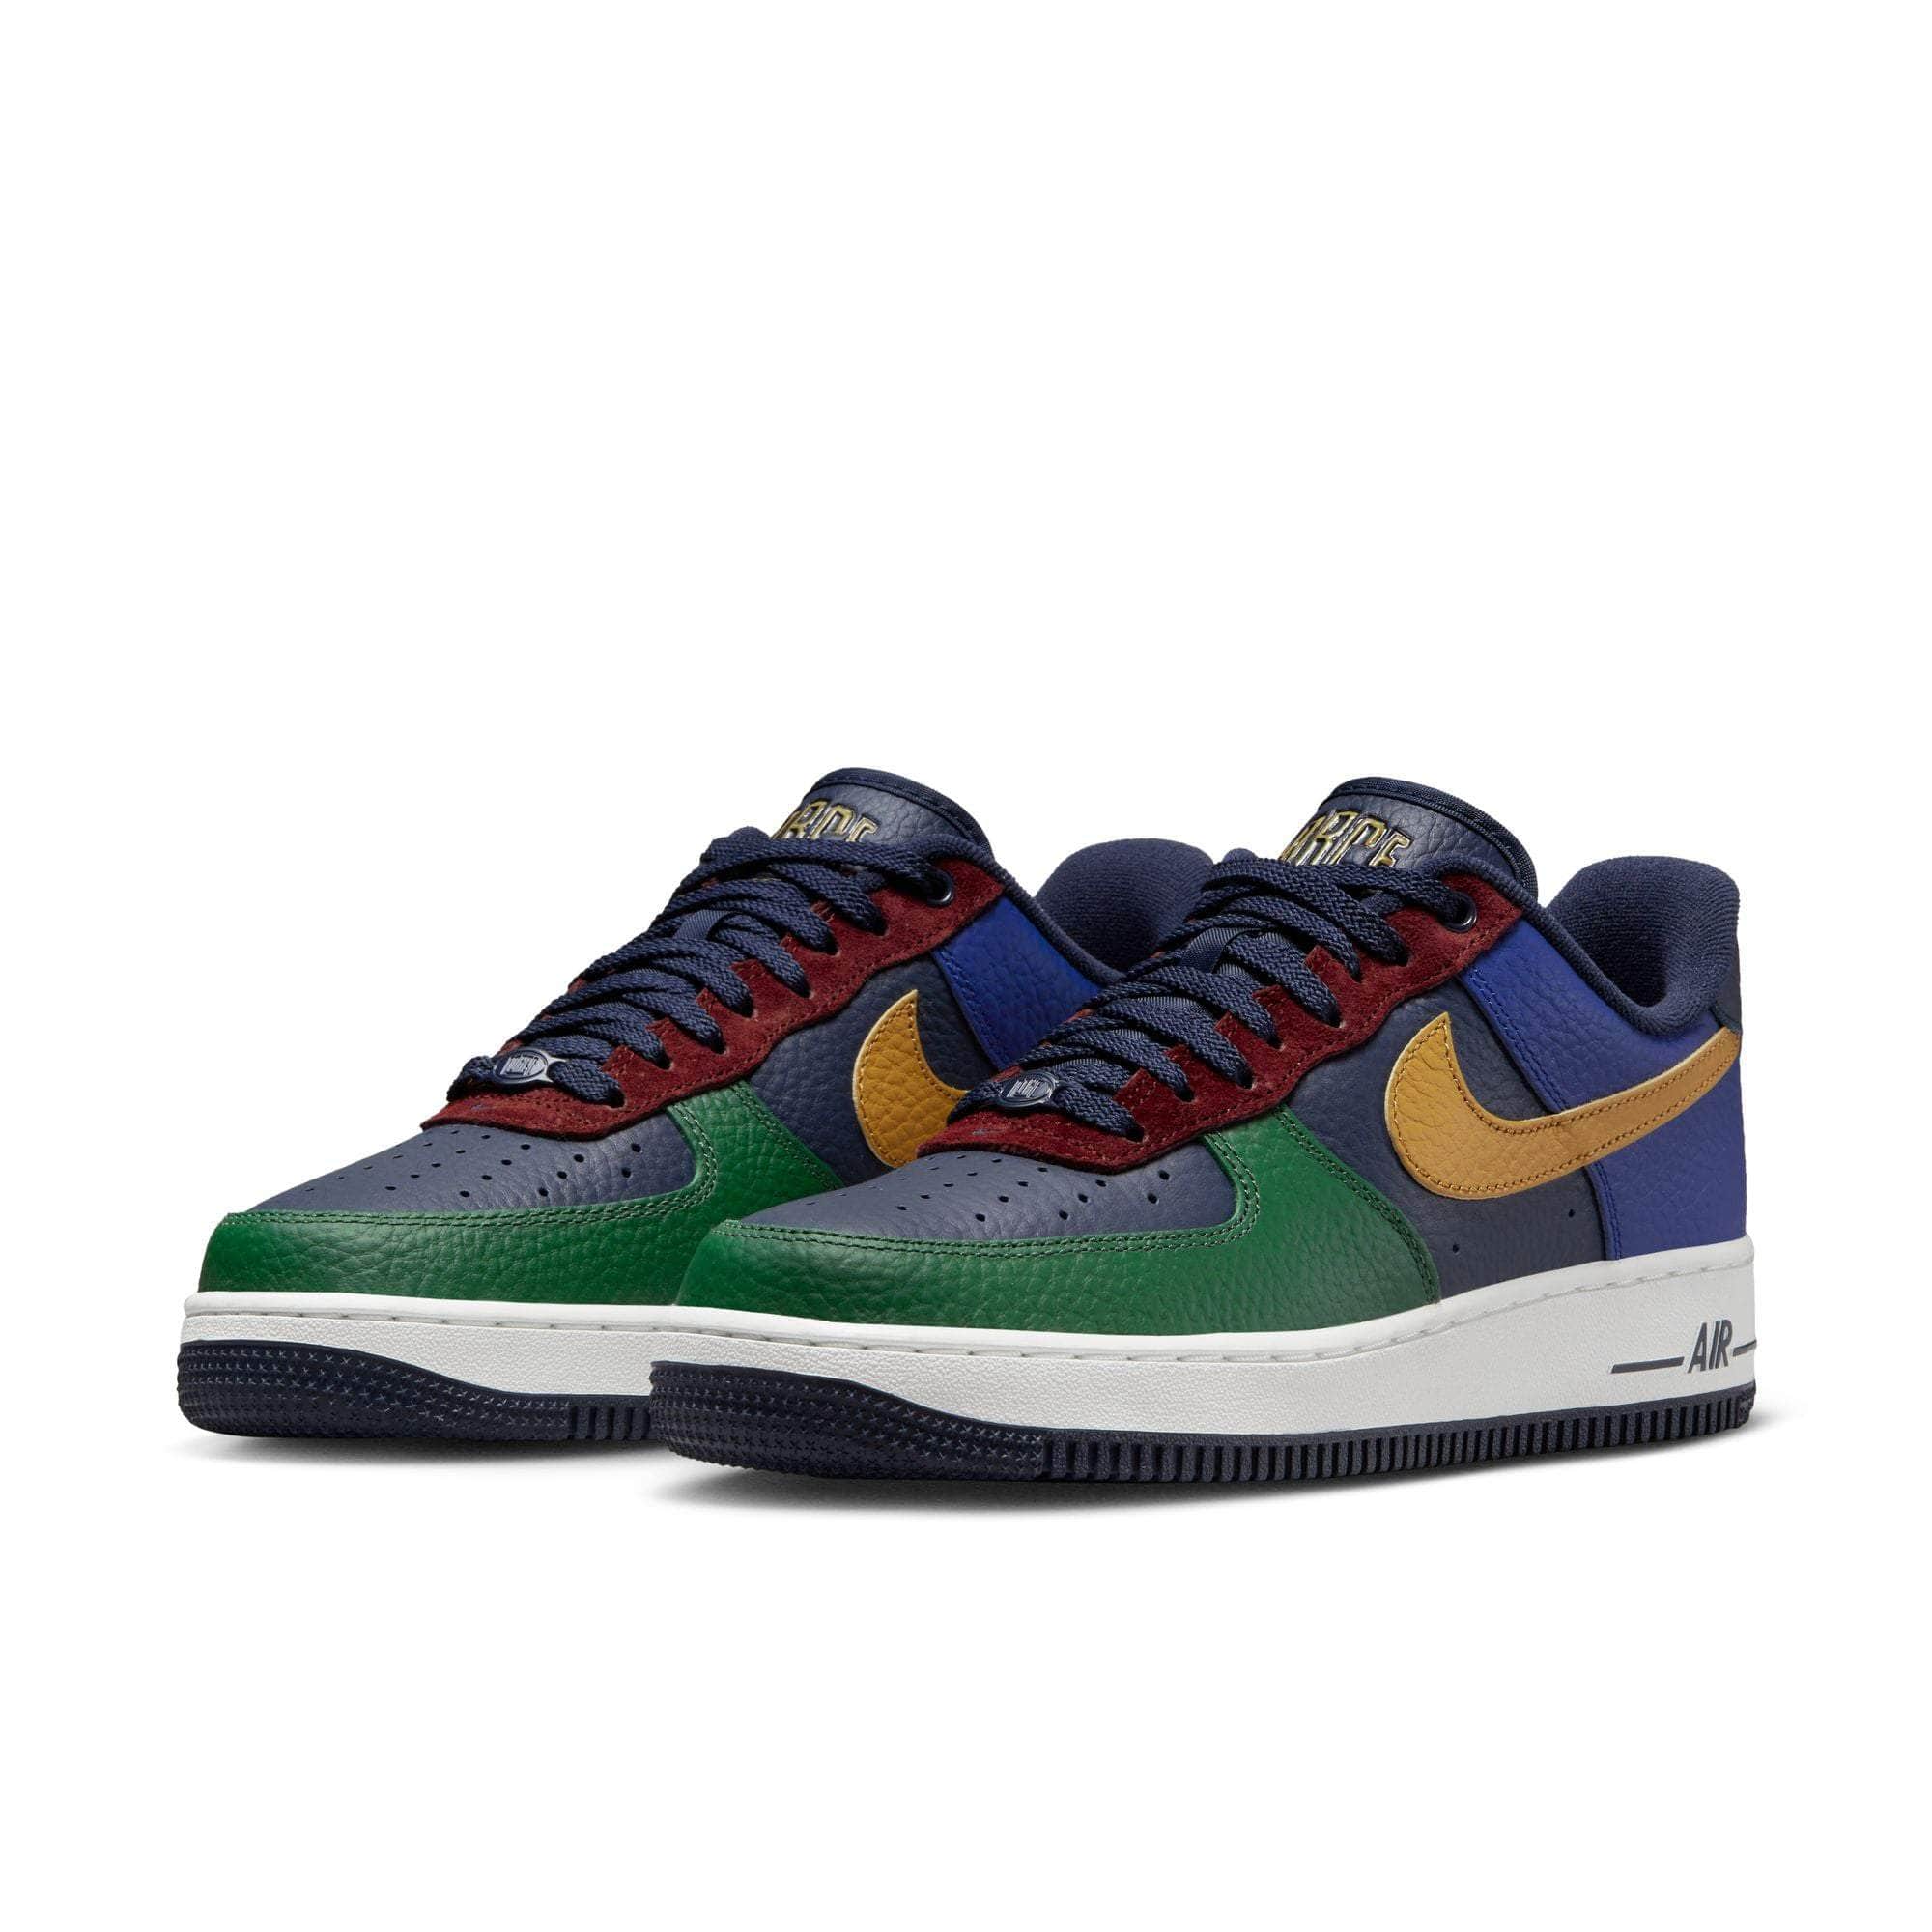 maximaliseren Circulaire Realistisch Nike Air Force 1 '07 "Obsidian and Gorge Green" - Women's - GBNY